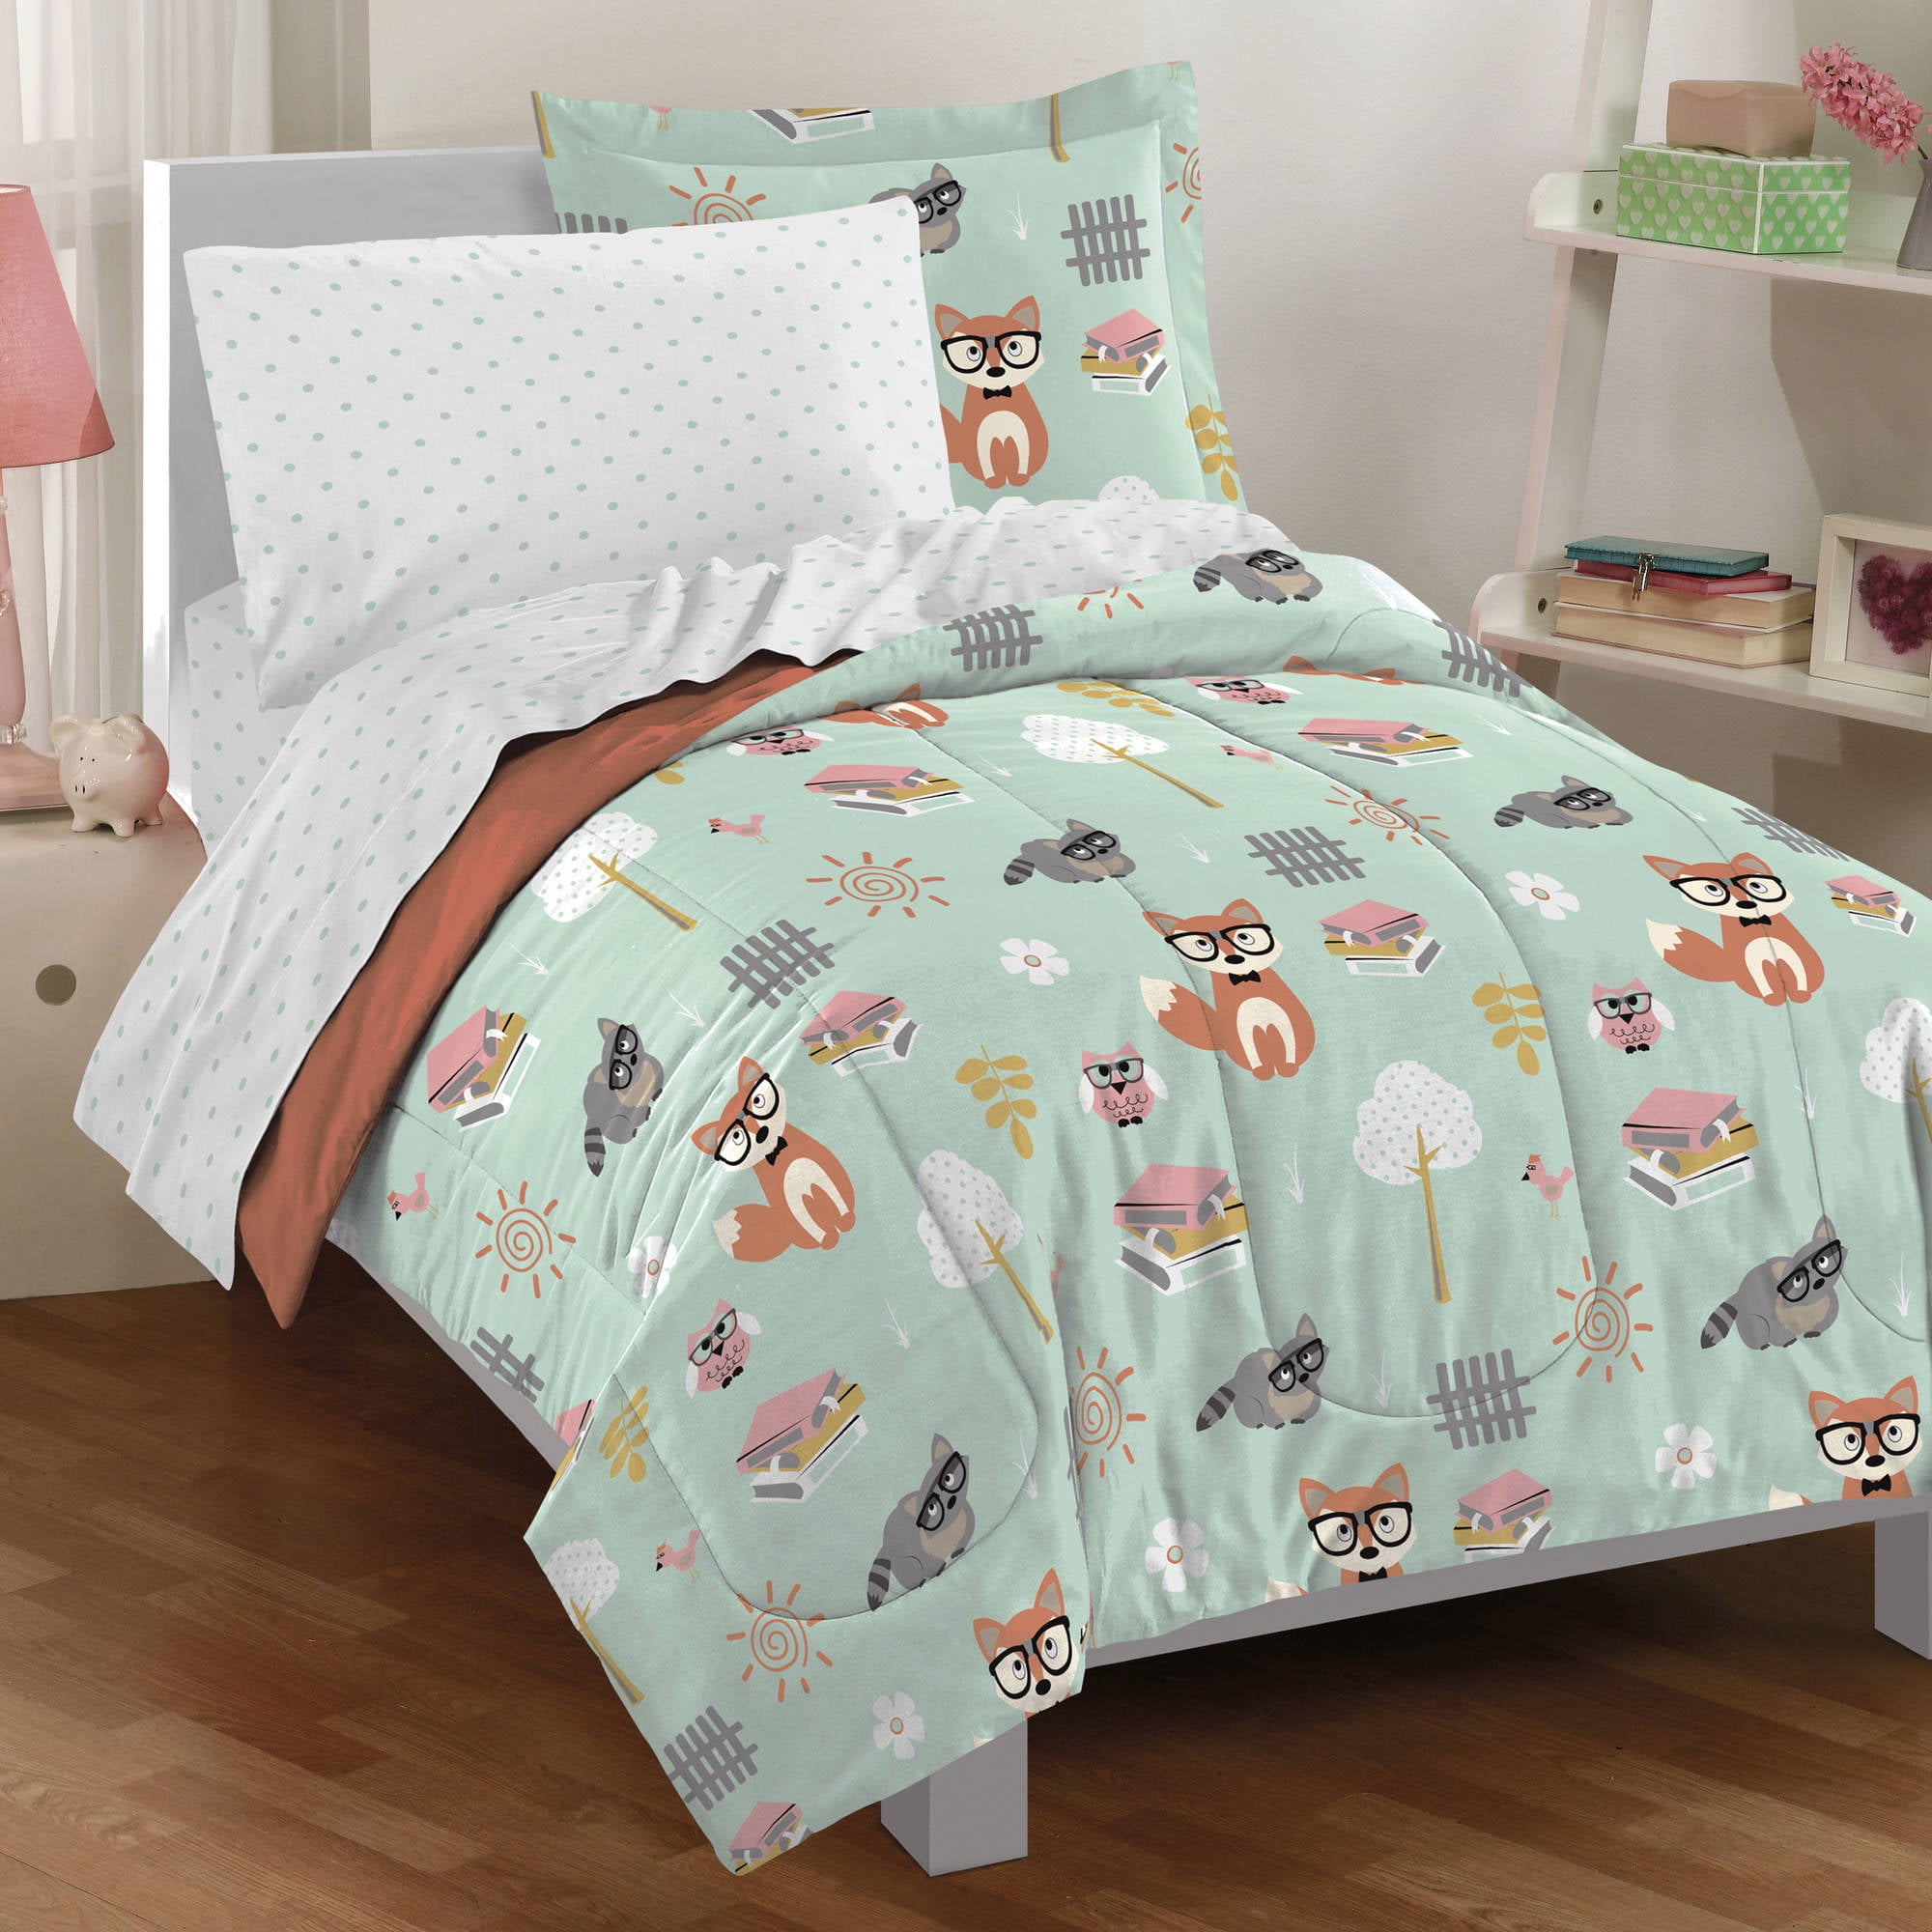 Kids Bedding Animals Insects